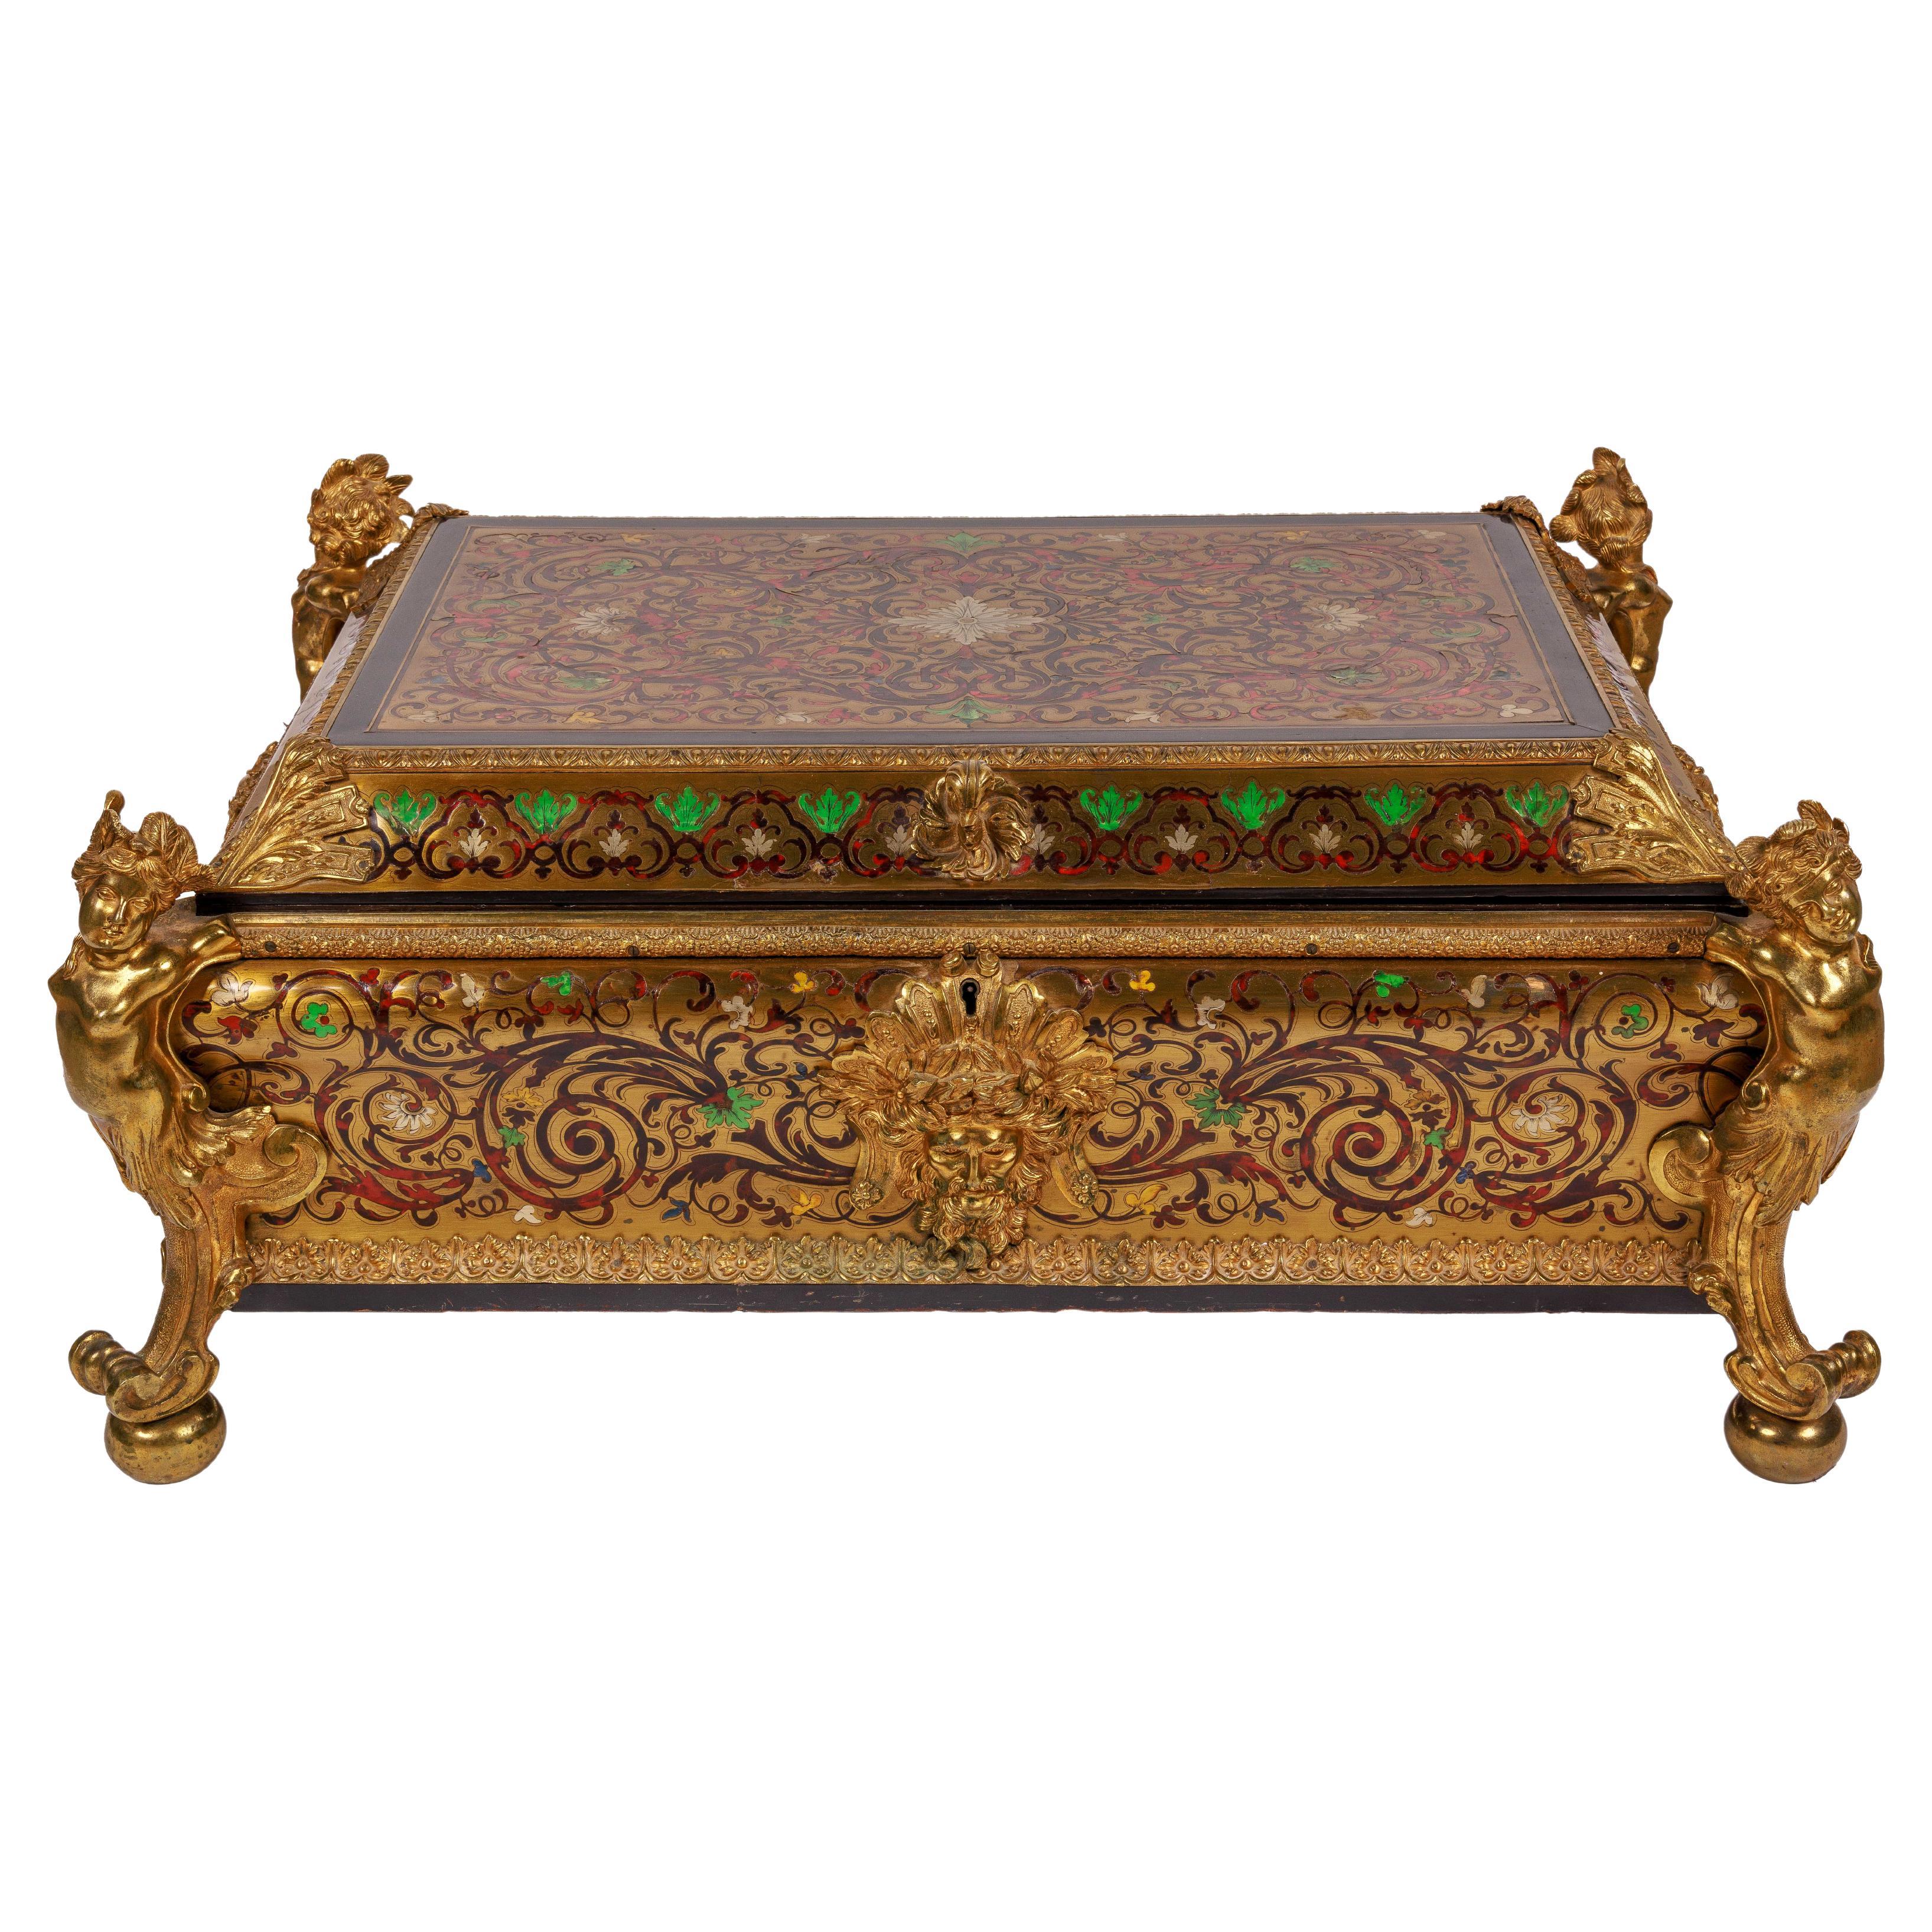 Monumental Louis XIV Style Gilt-Bronze Mounted Boulle Marquetry Casket Box For Sale